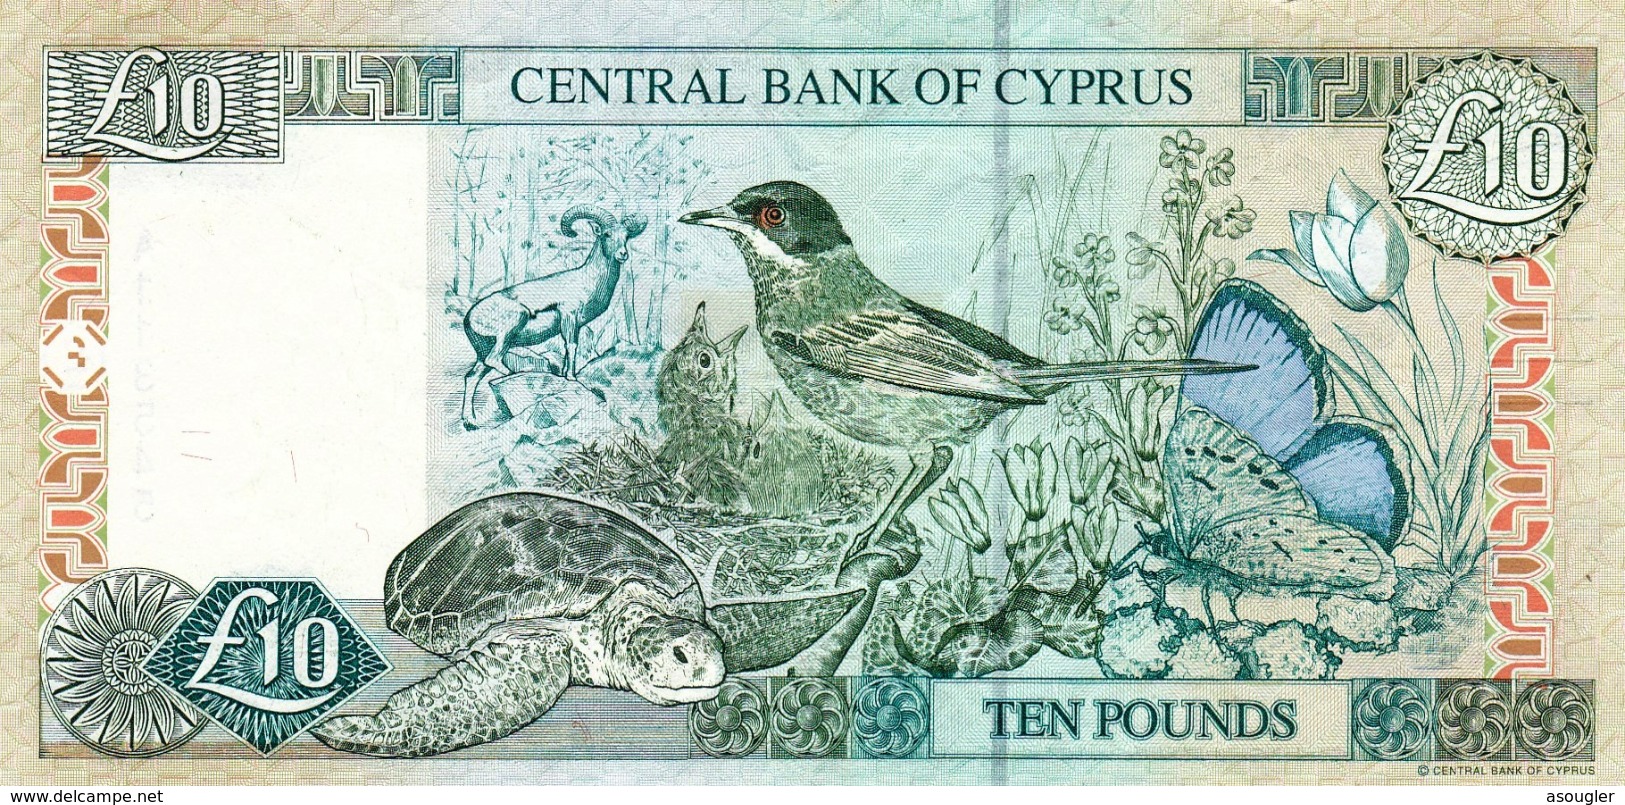 CYPRUS (GREECE) 10 POUNDS 1-2-1997 VF-EXF P-59 PREFIX "A" "free Shipping Via Registered Air Mail" - Cyprus